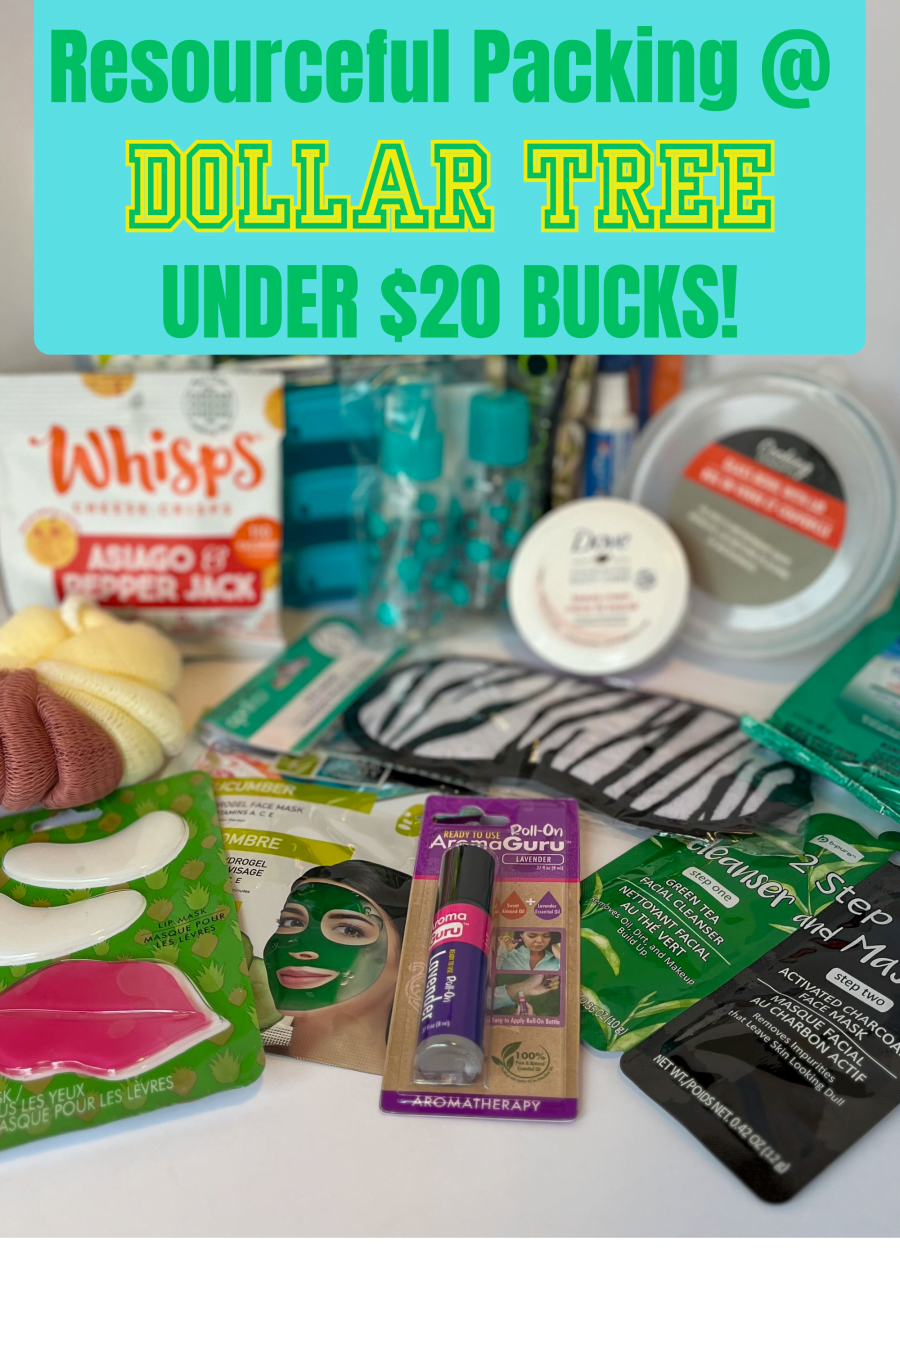 A photo with an array of travel items and a label at the top with the text, "Resourceful Packing @ Dollar Tree Under $20 Bucks!".